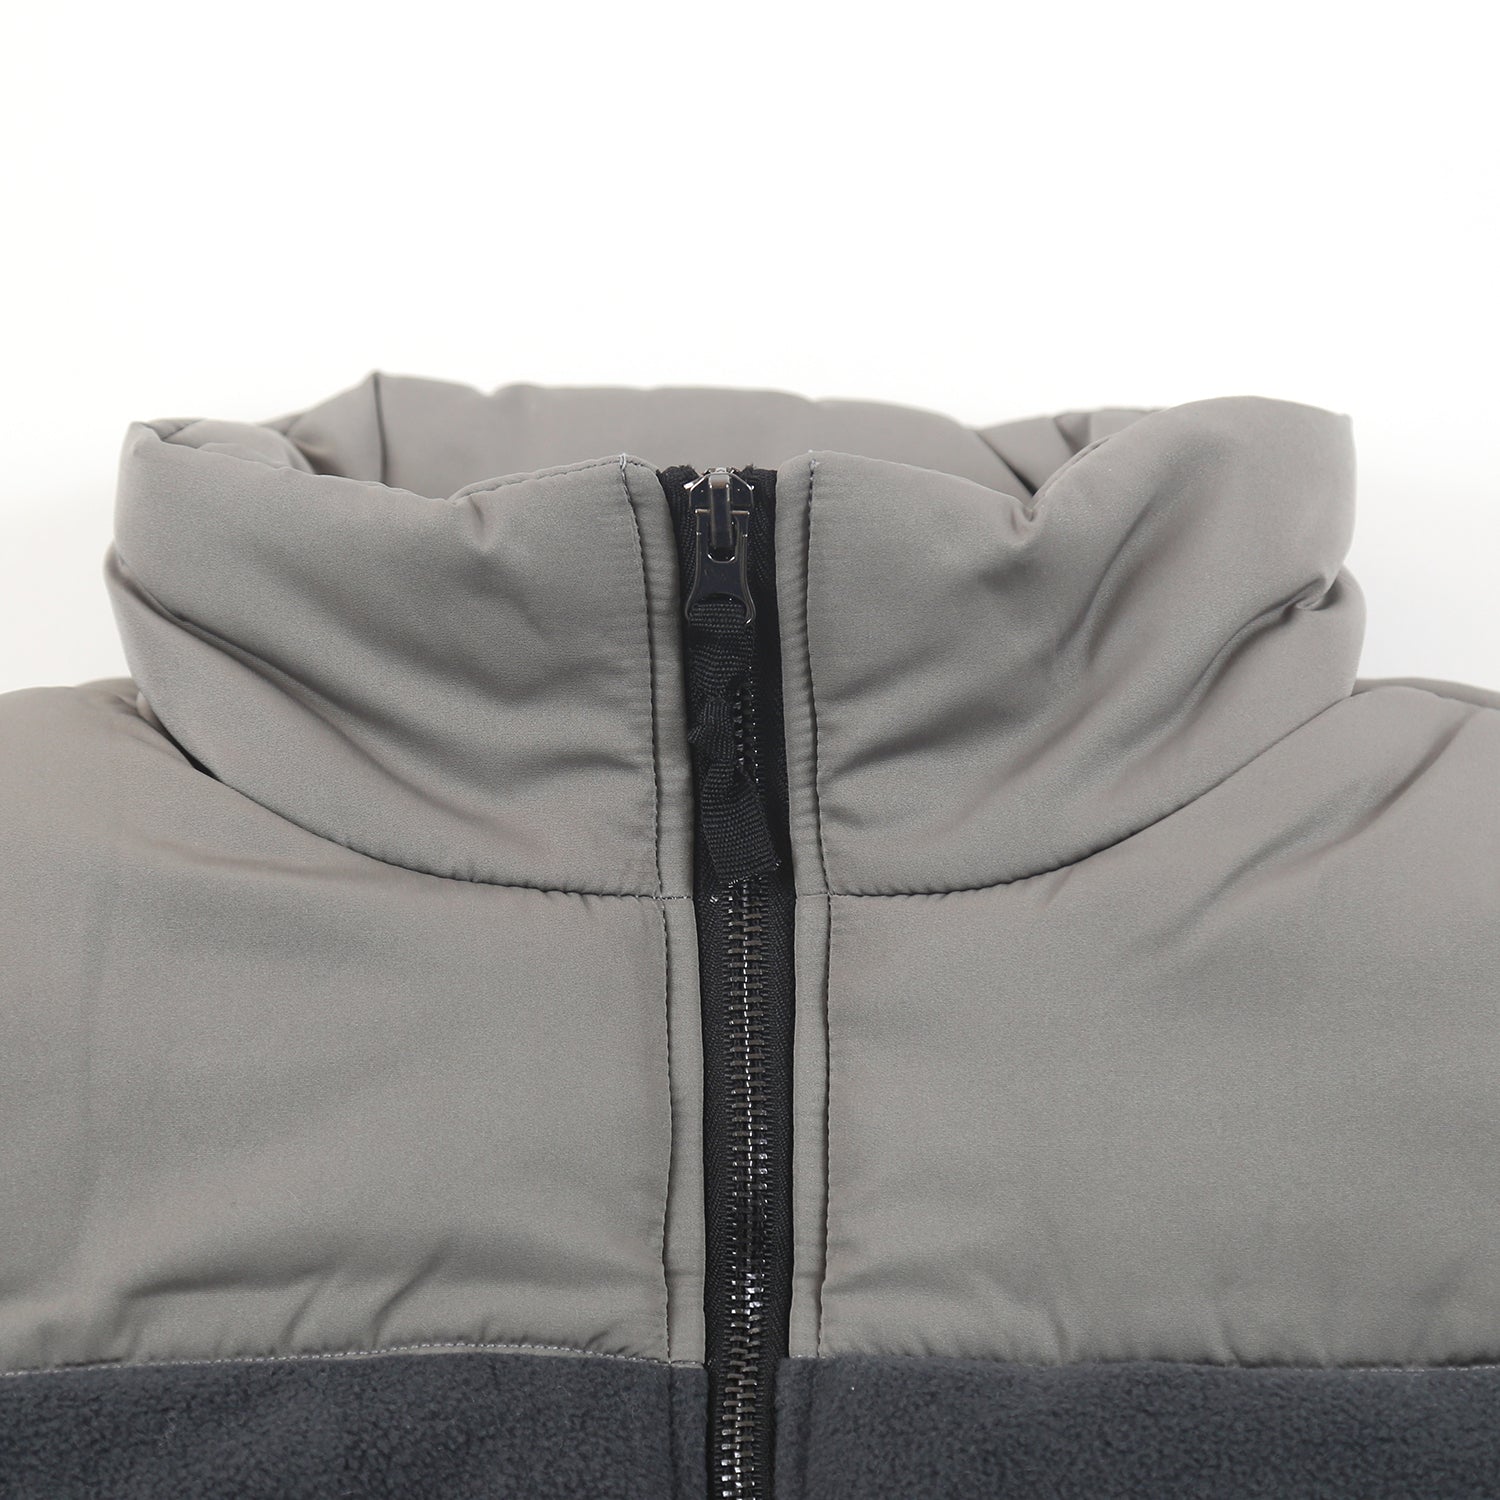 SAVE 70%- Graphite Satin and Fleece Quilted Vest